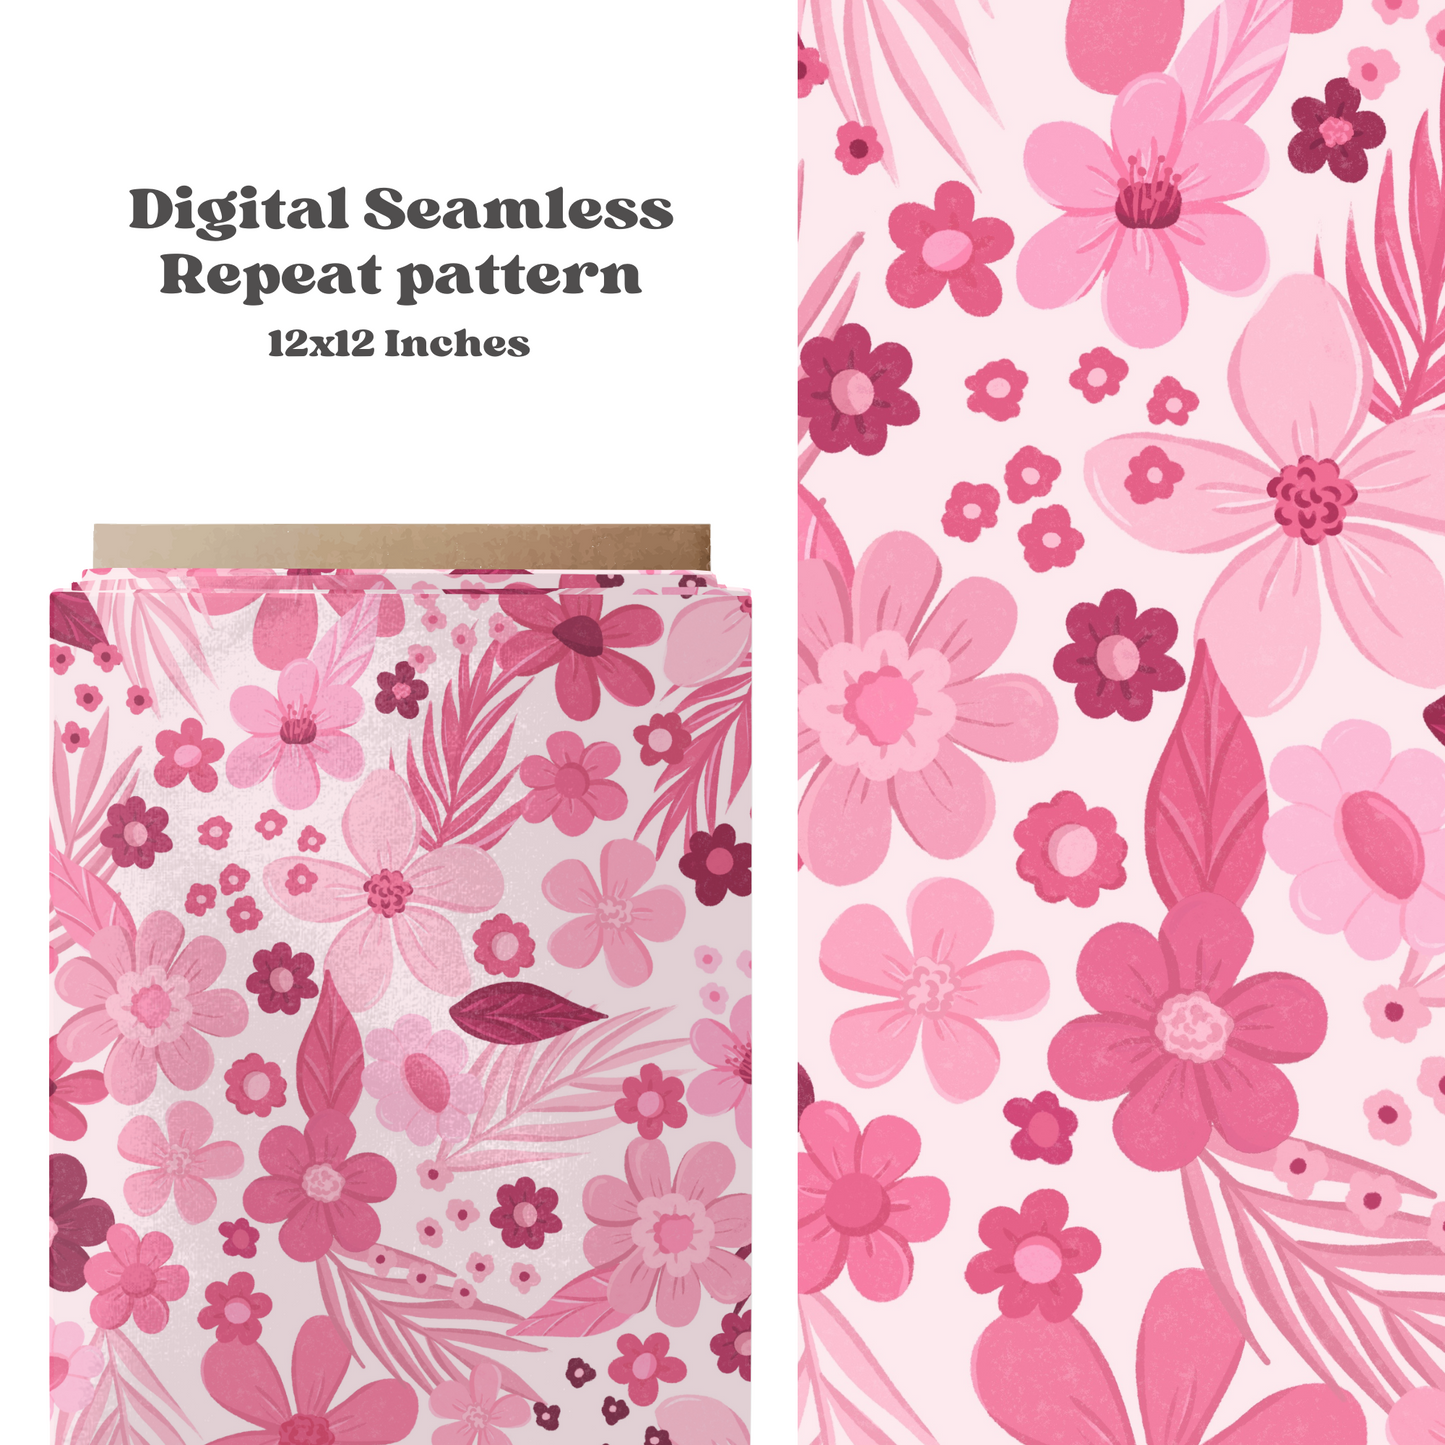 Girly Spring Floral Pattern